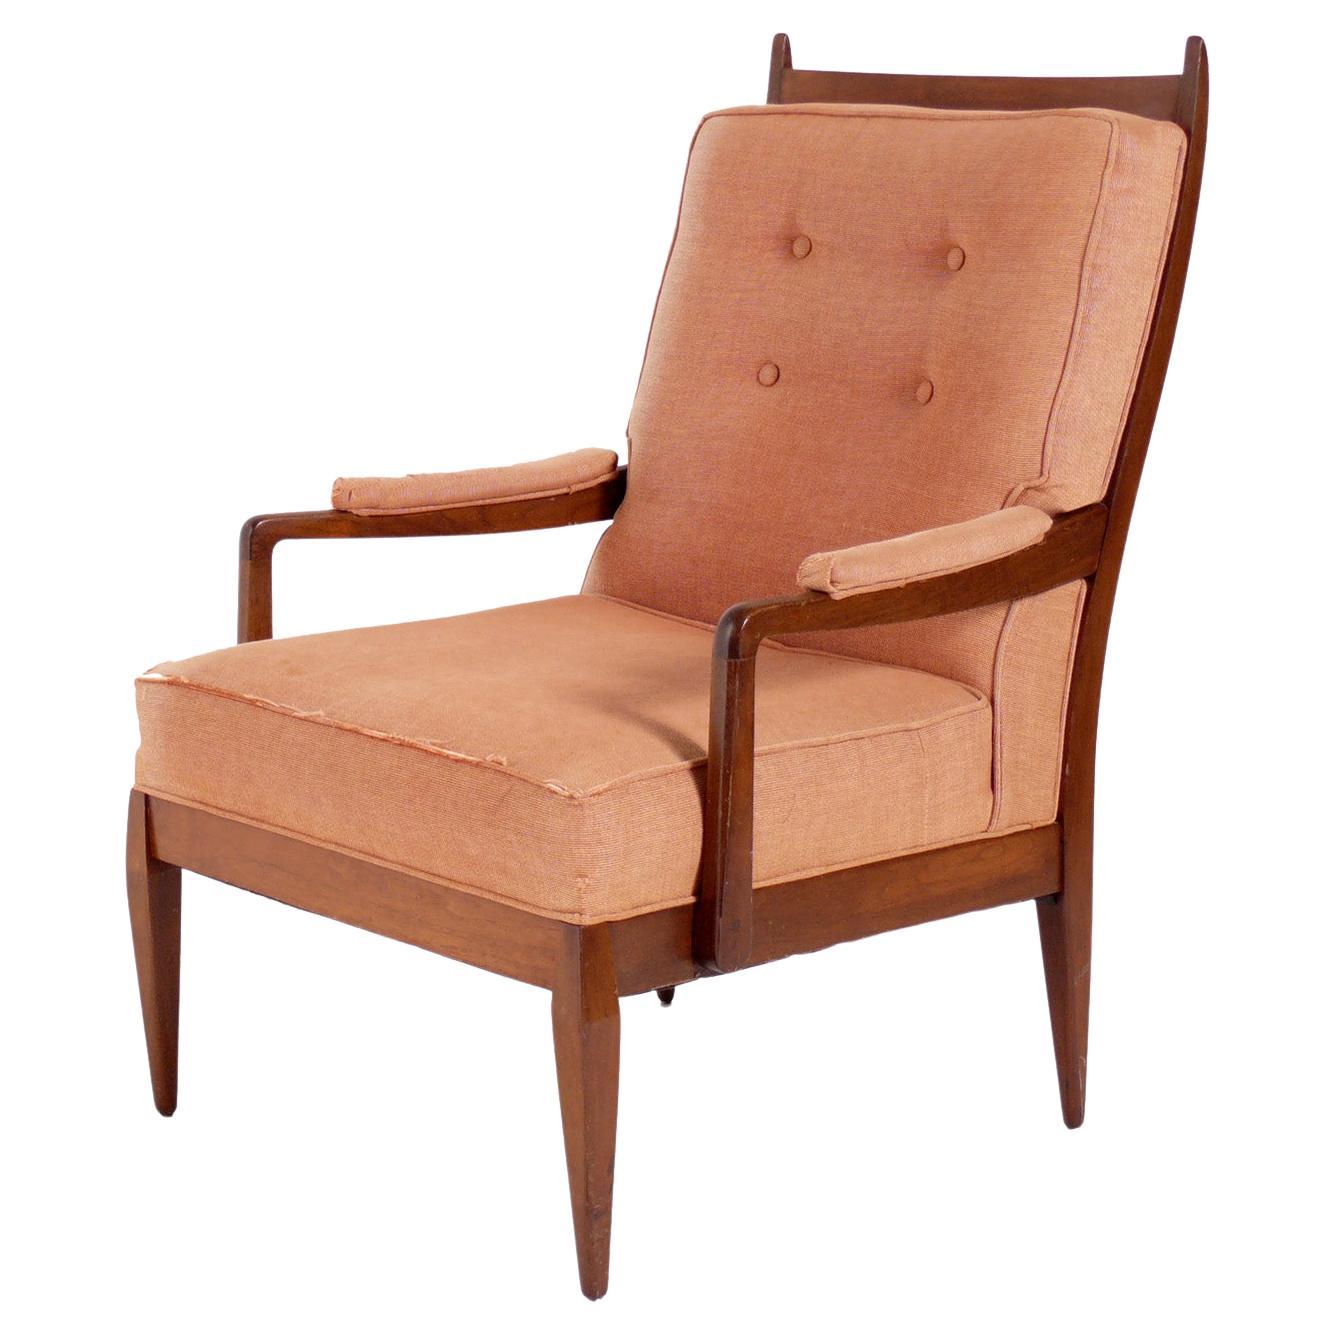 Tall Curvaceous Antler Back Lounge Chair Refinished Reupholstered in Your Fabric